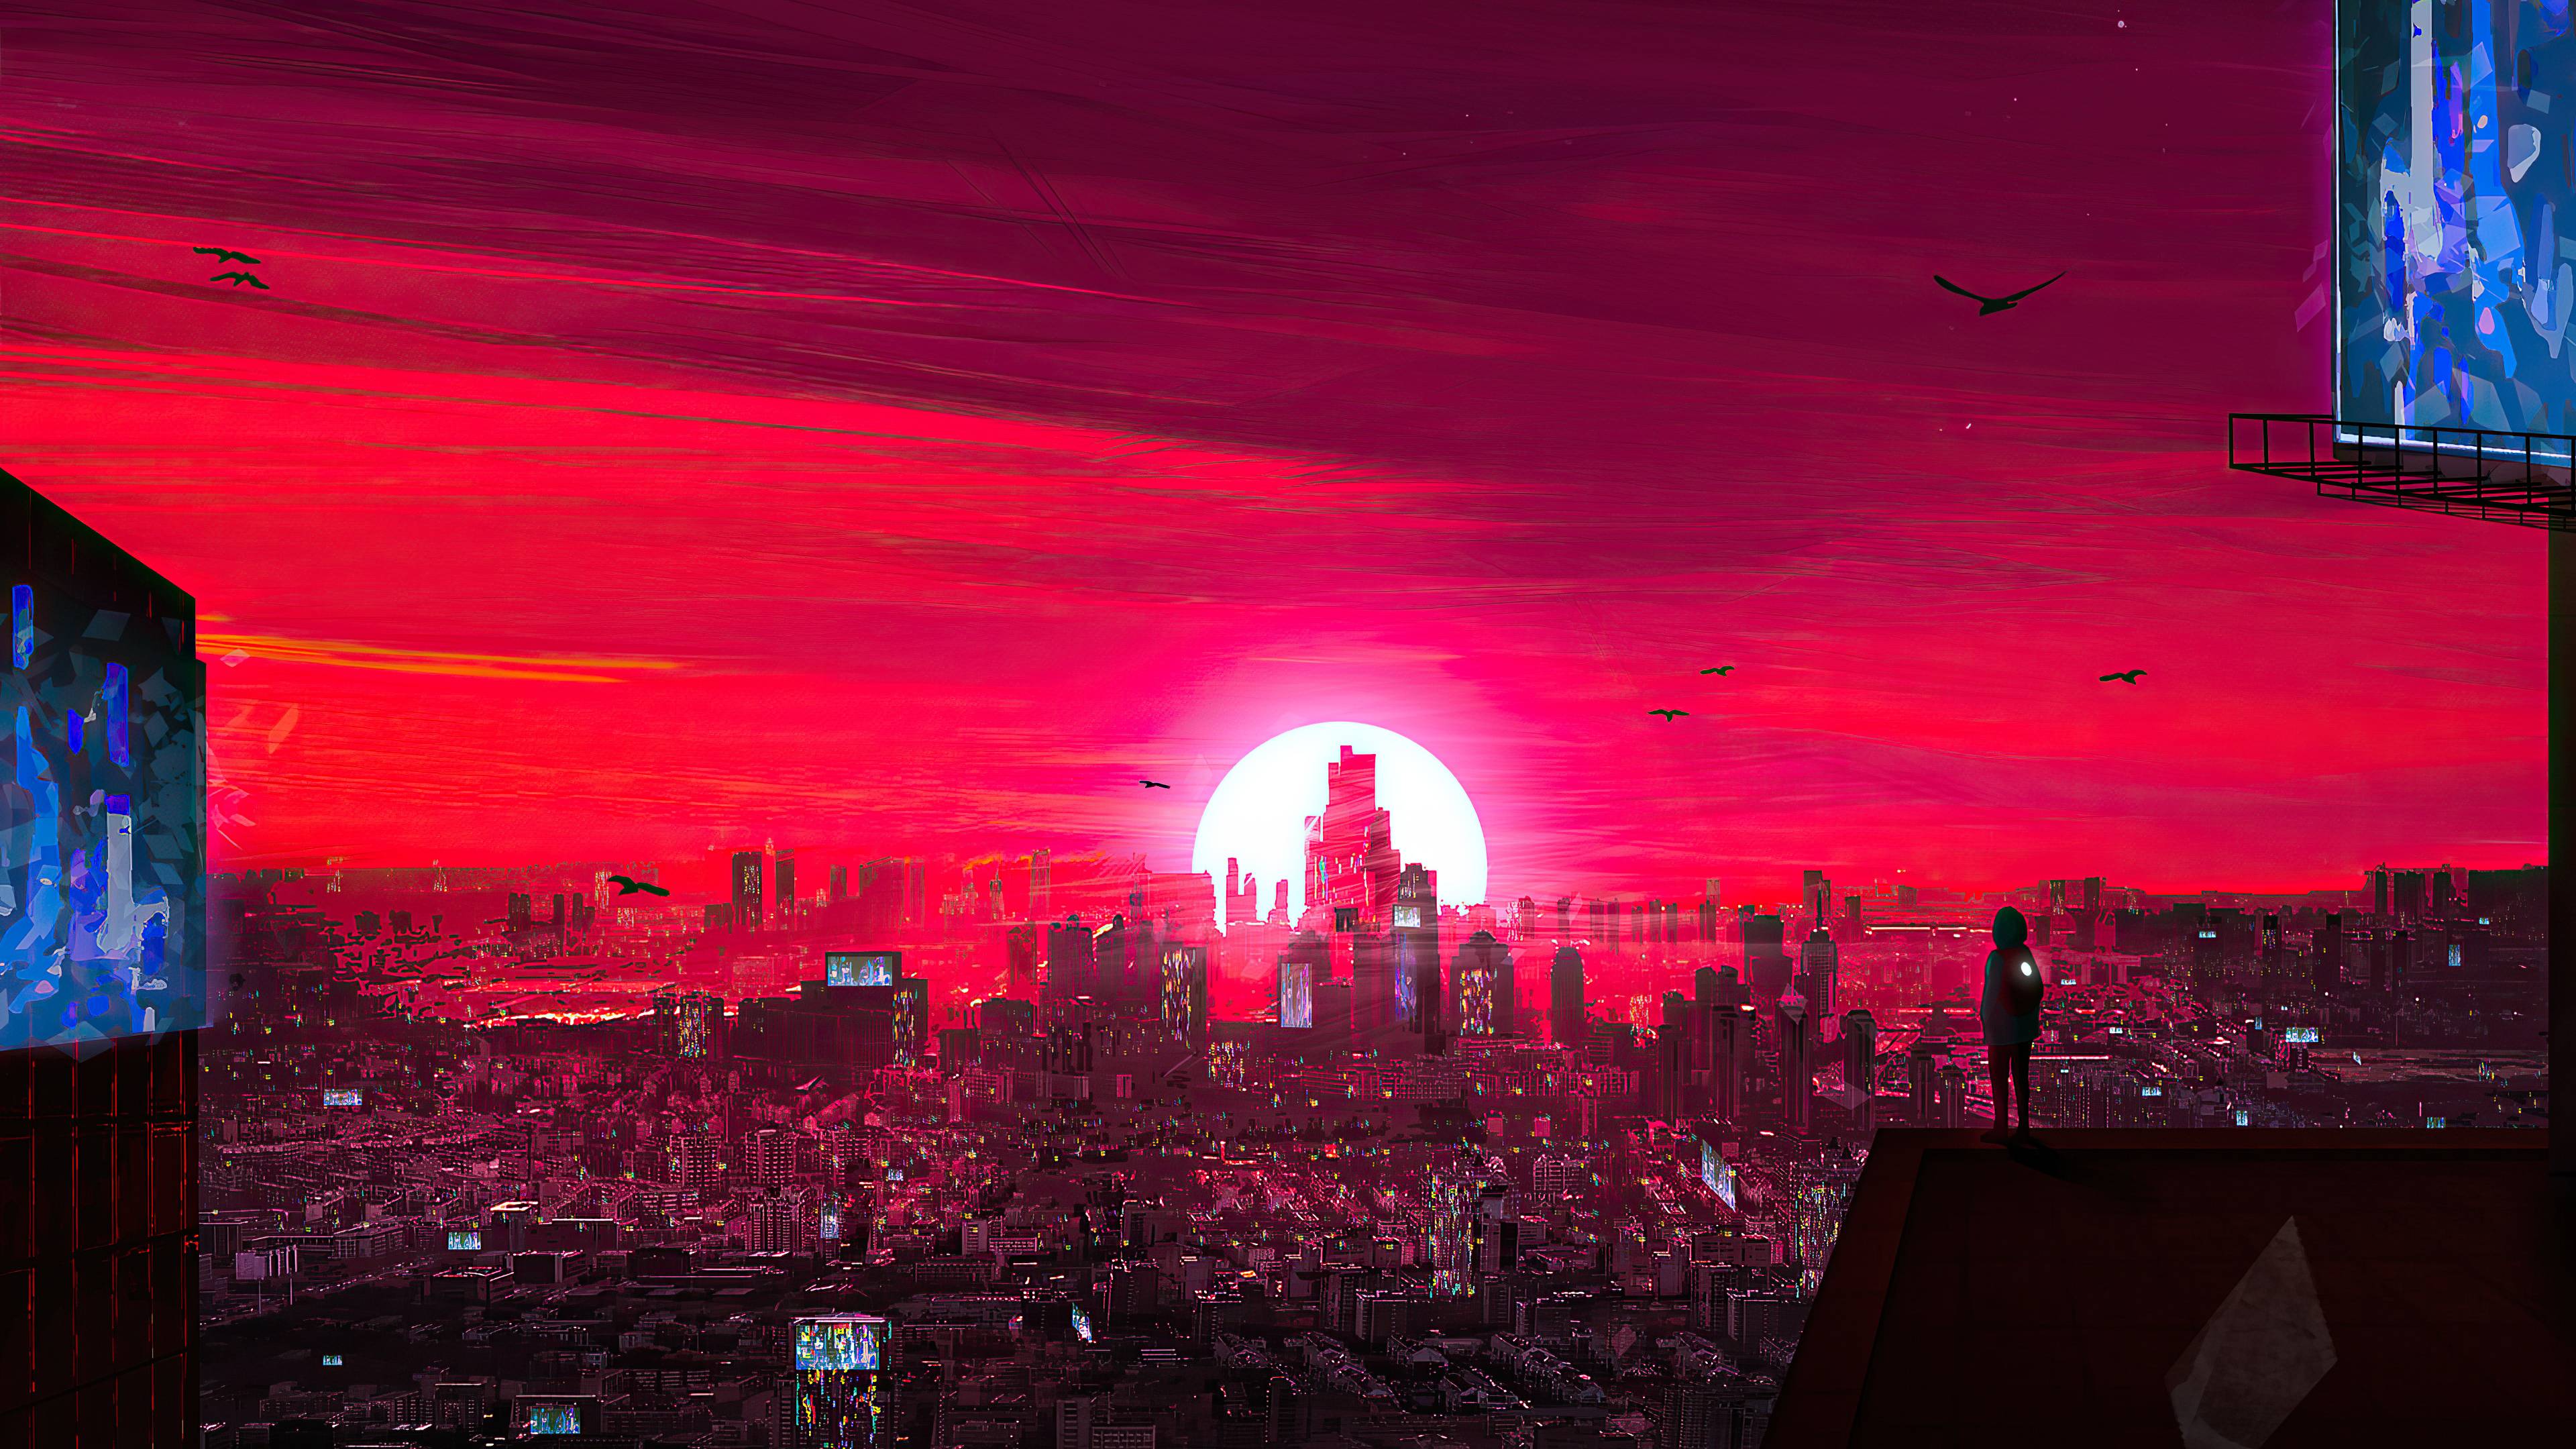 A city with buildings and people in it - Cyberpunk